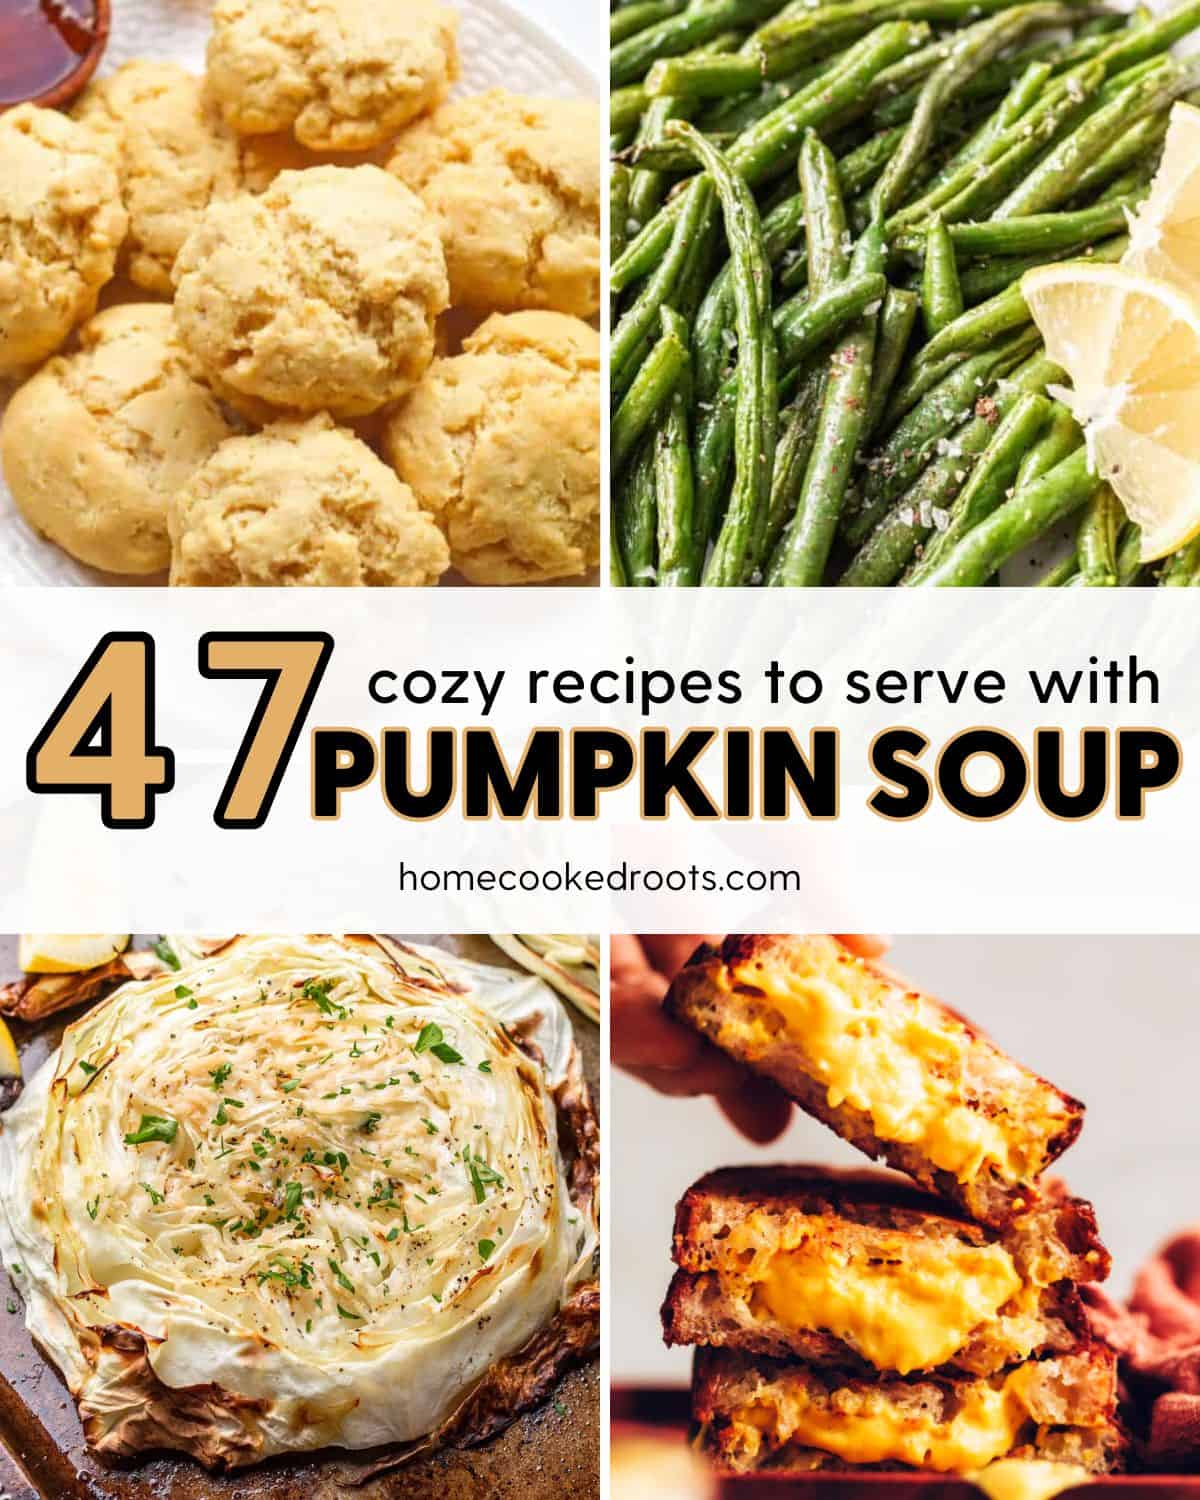 4 photos of recipes that would pair well with pumpkin soup with overlay text that says '47 Cozy Recipes to serve with Pumpkin Soup.'